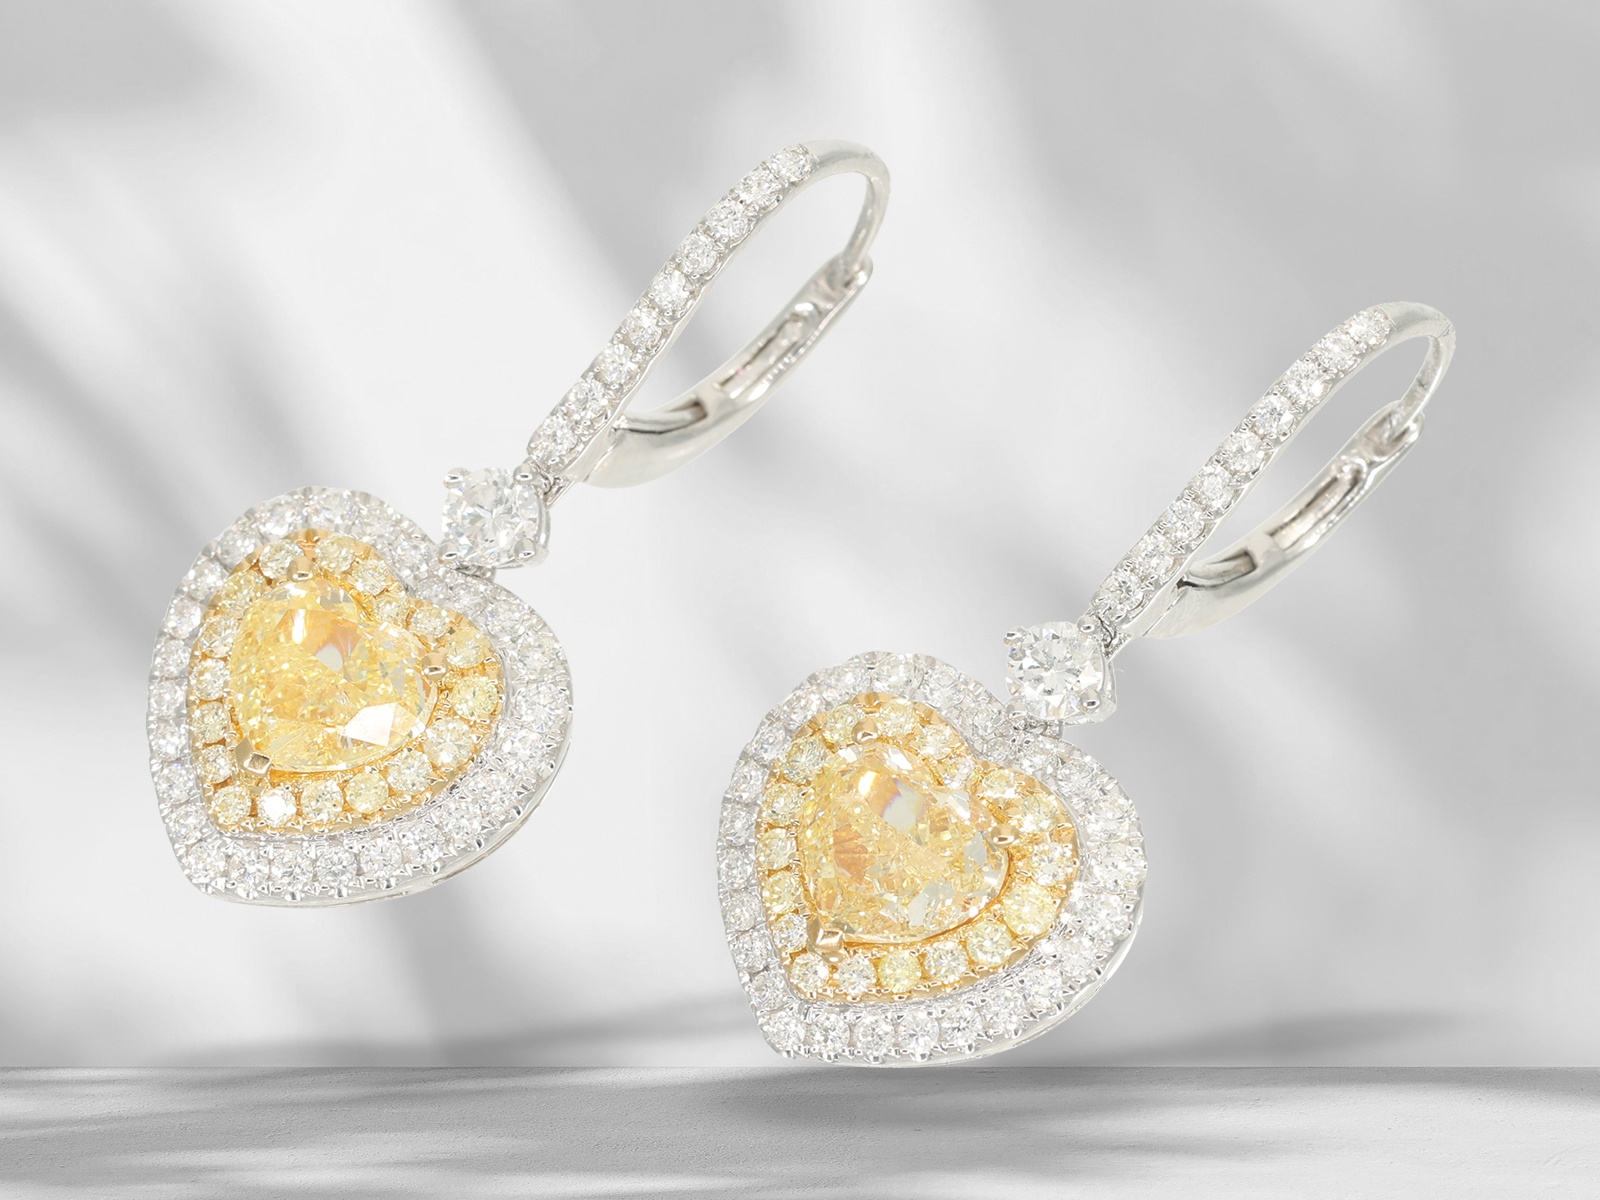 Earrings: High quality earrings set with brilliant-cut diamonds, 2 x 1ct fancy light yellow - Image 2 of 8